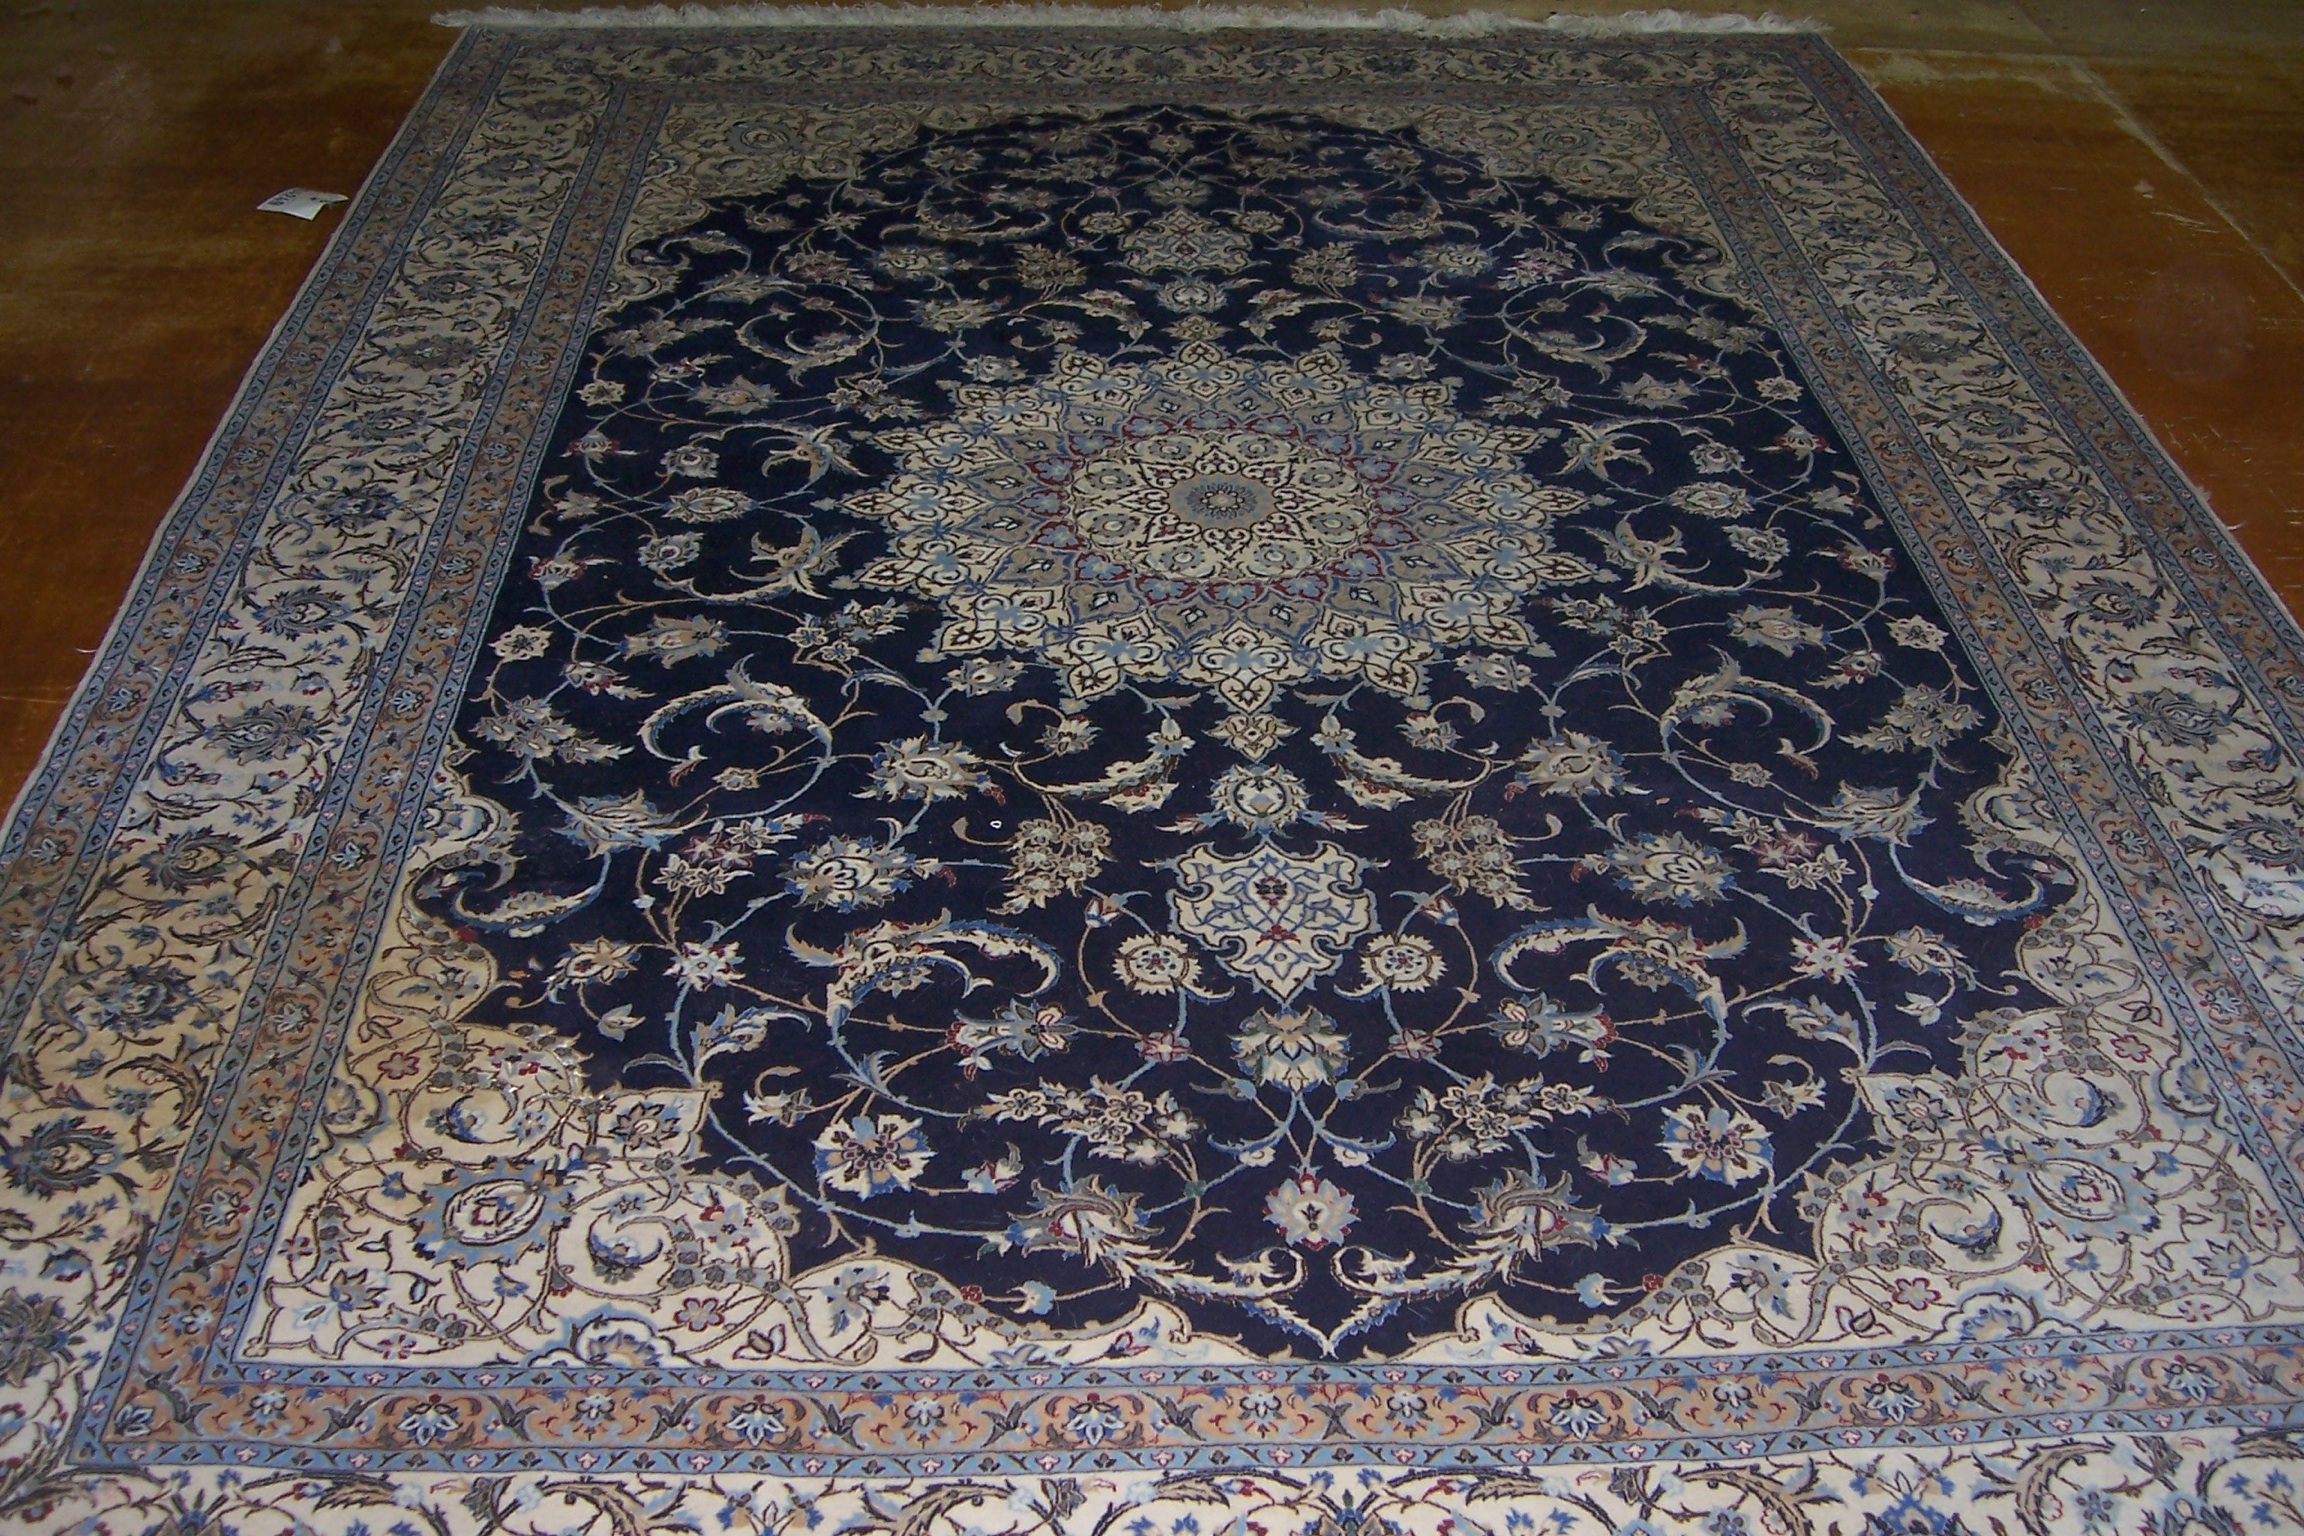 Silk Rug Stain Removal Before